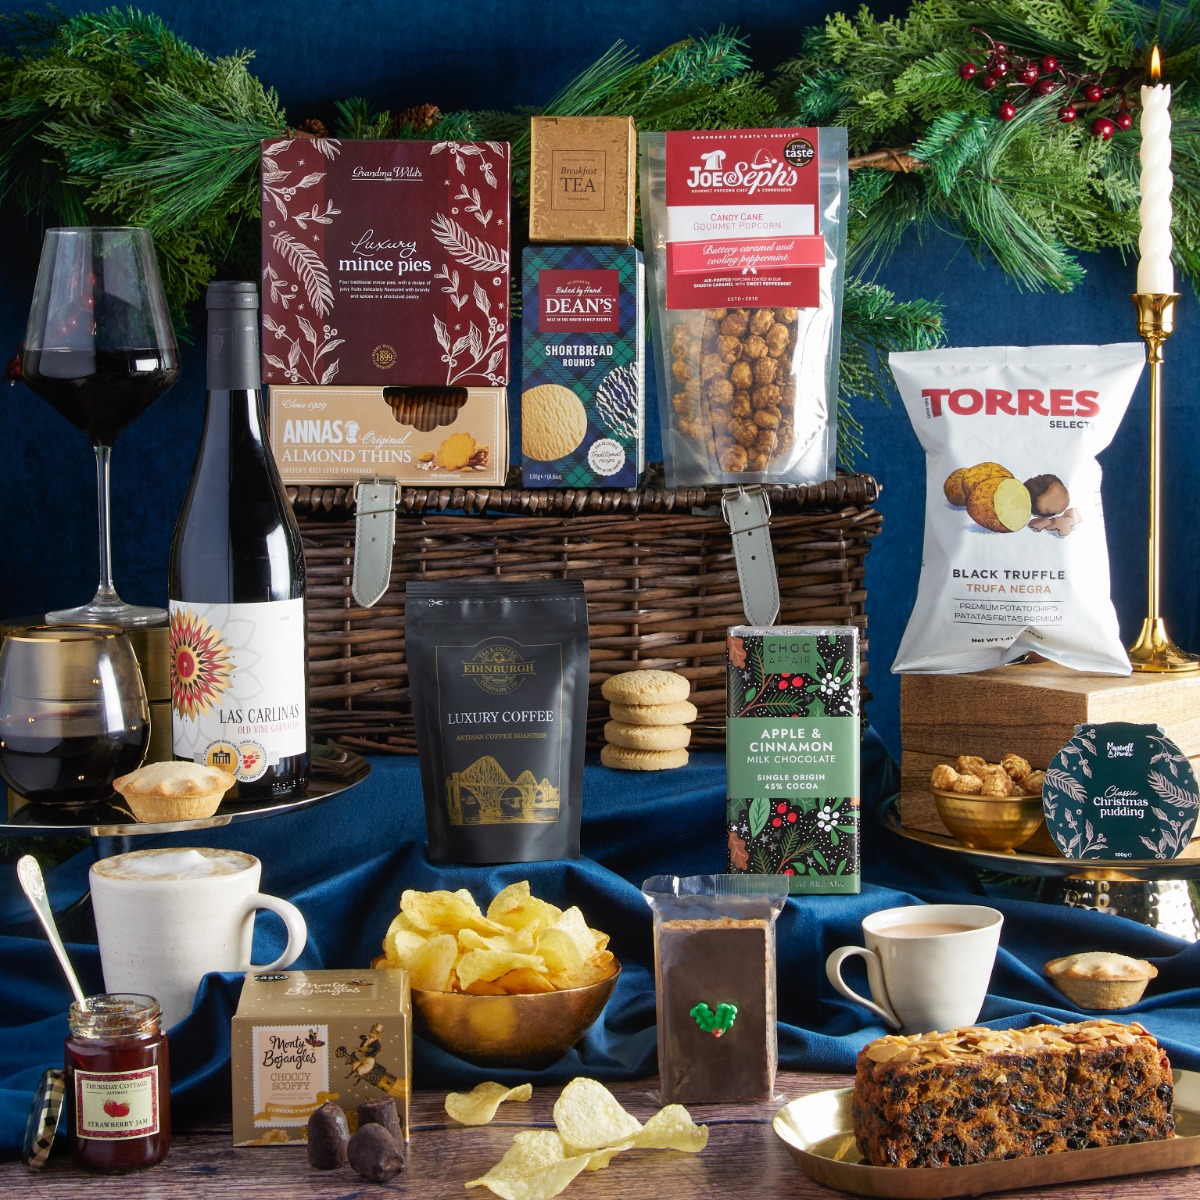 The Magic of Christmas Hamper with contents on display as a recommended Christmas gift for wine lovers